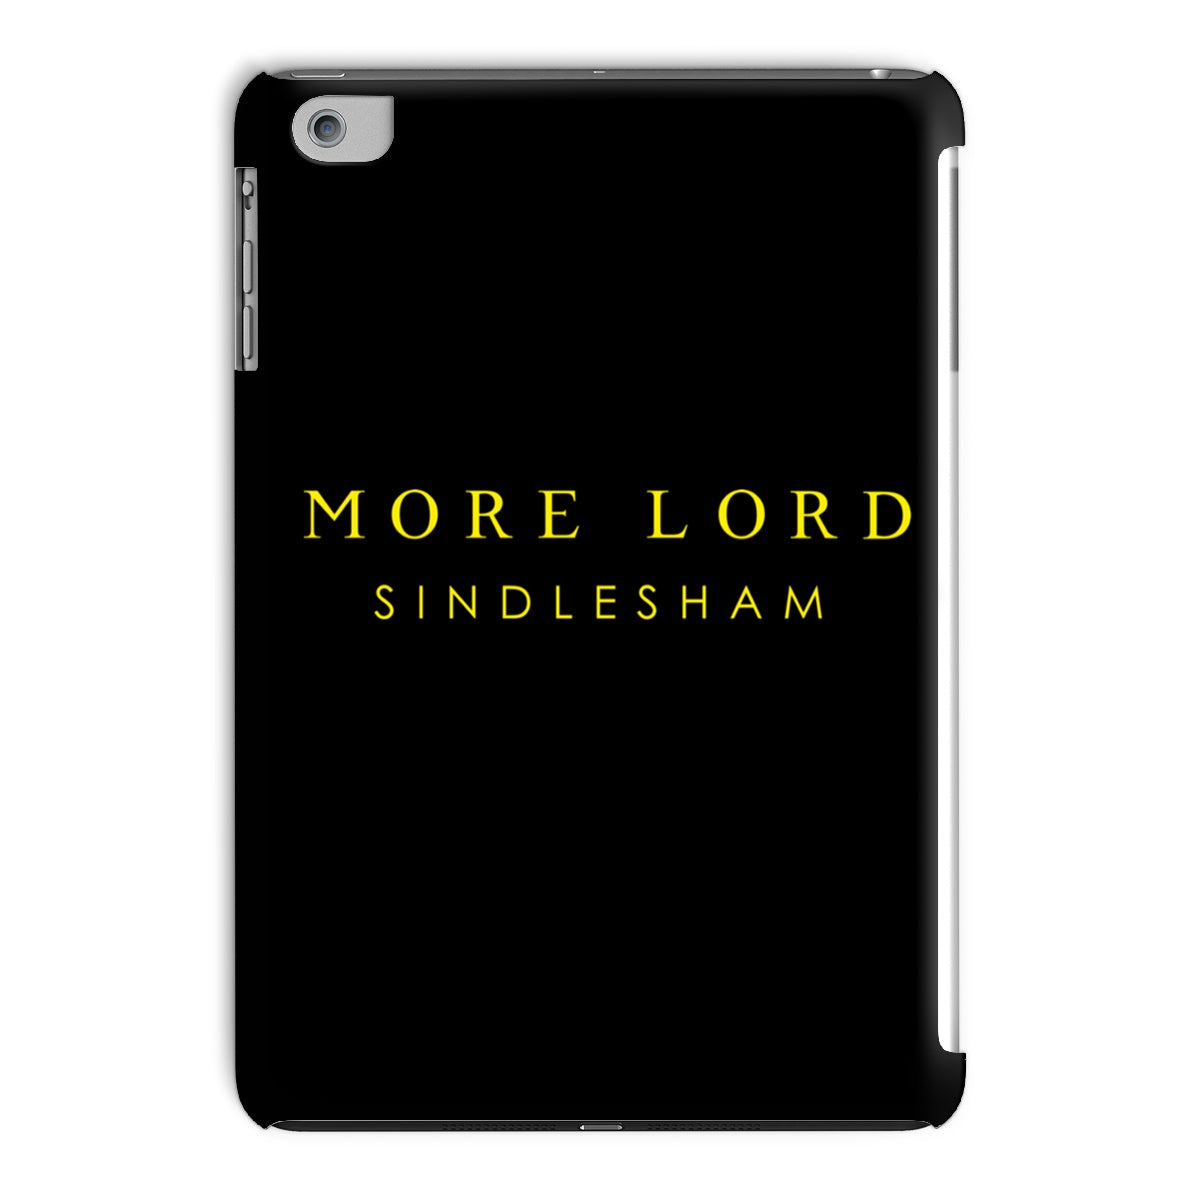 More Lord Sindlesham Tablet Cases